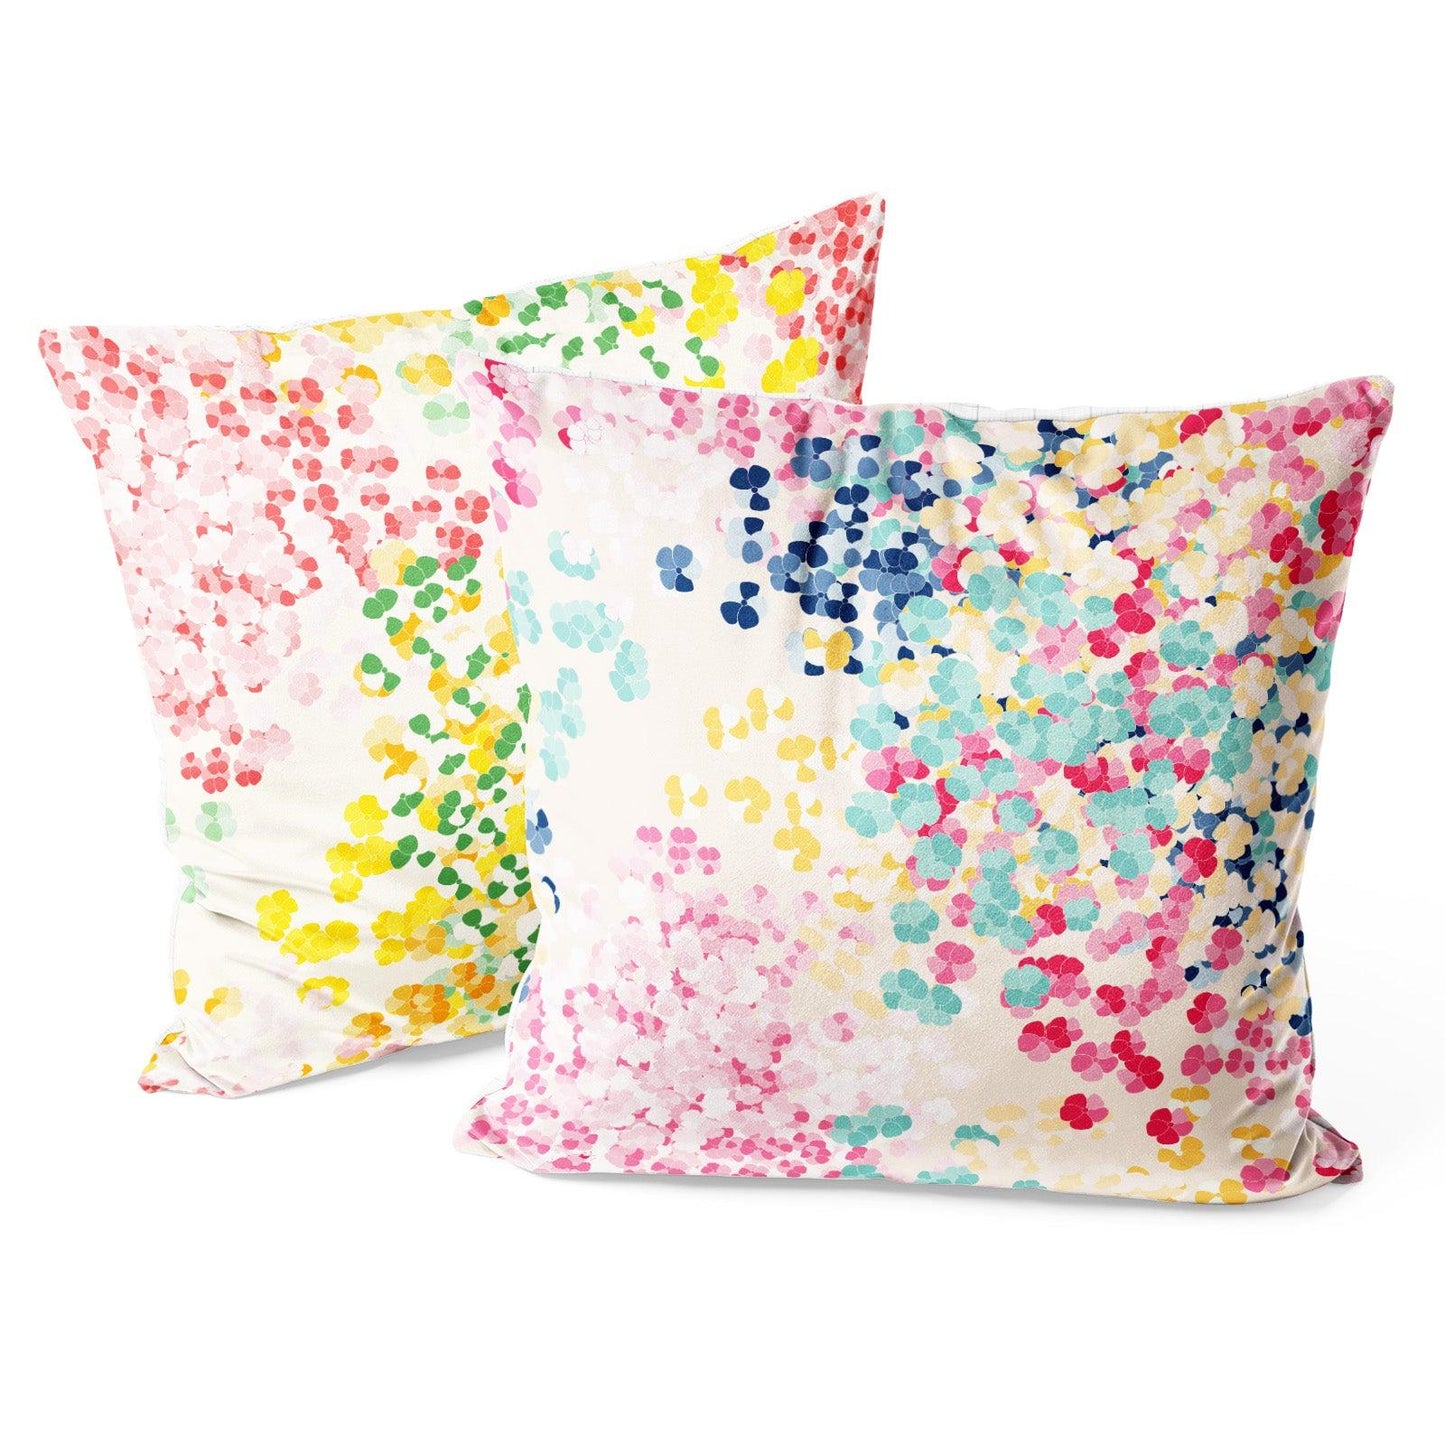 Modern Flower Throw Pillow Covers Pack of 2 18x18 Inch (Colorful Tiny Flowers) - Berkin Arts